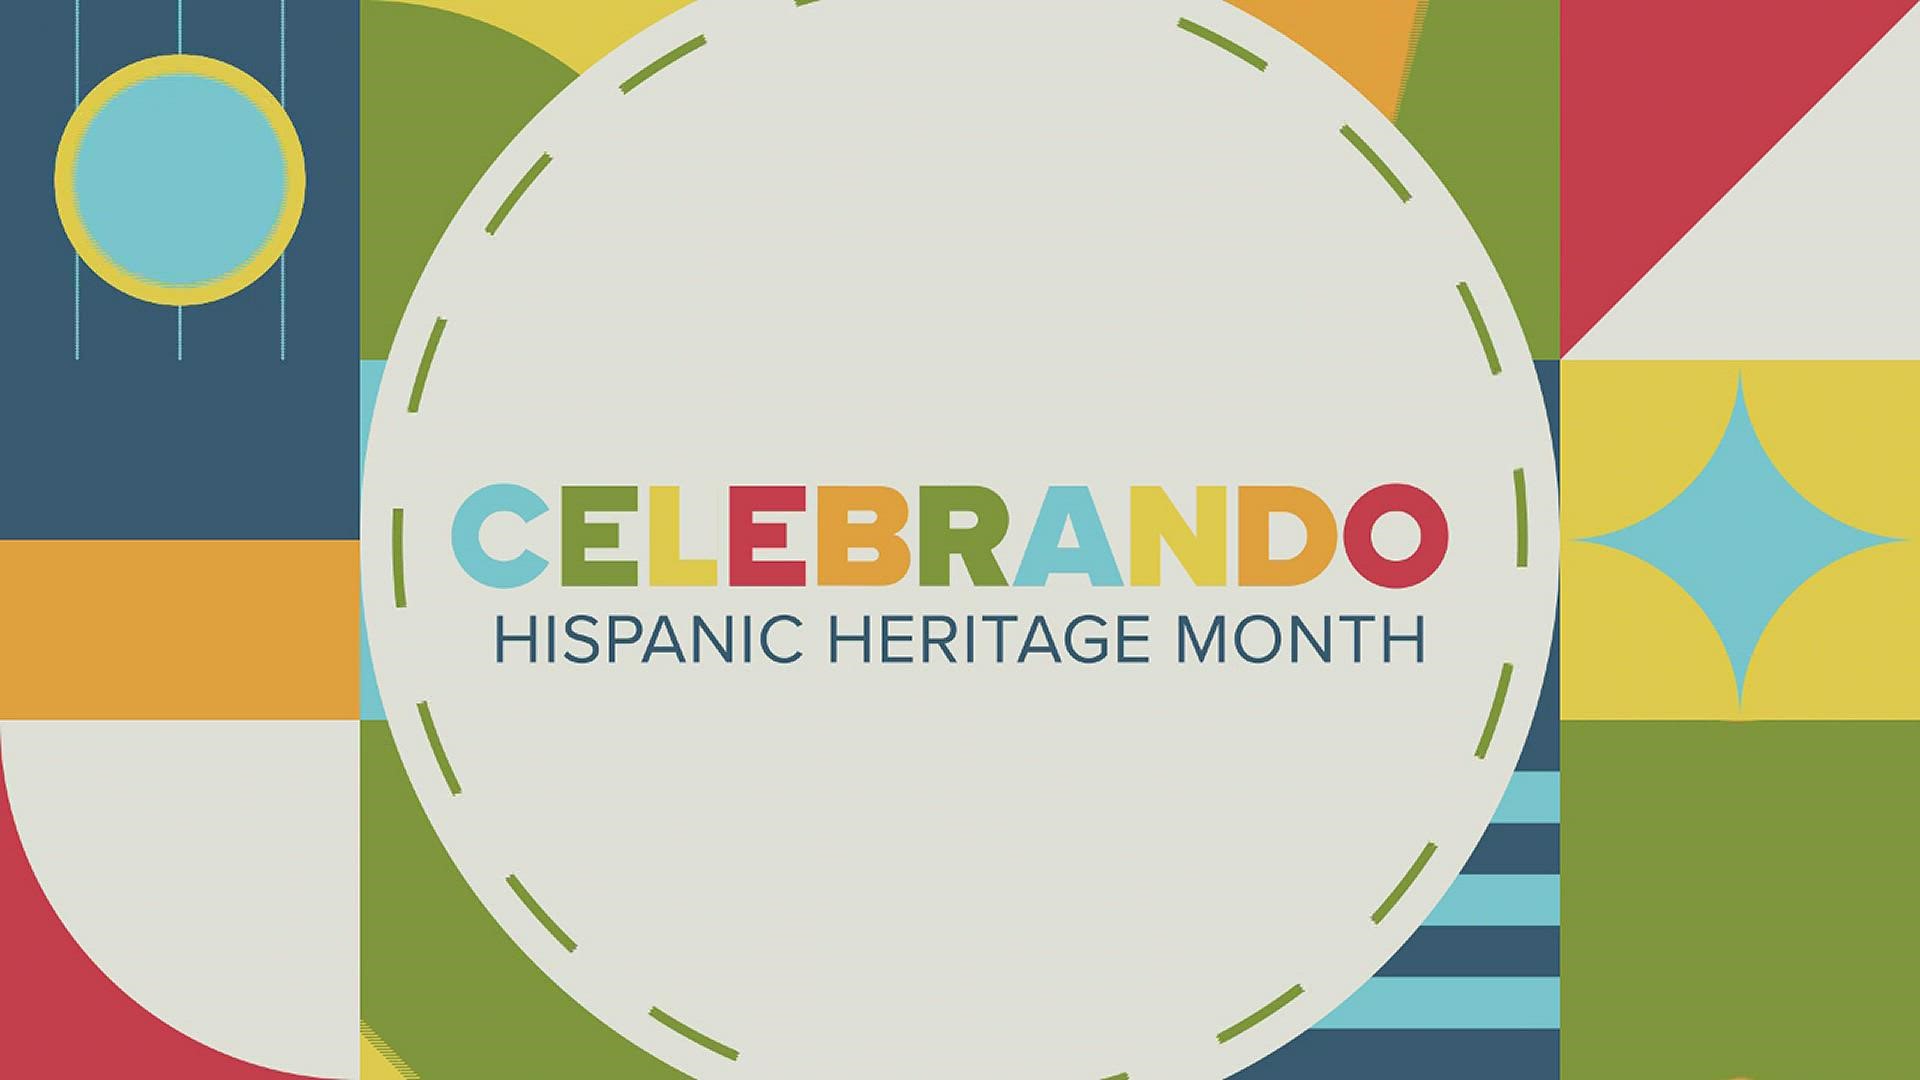 The theme for this year is Esperanza: A celebration of Hispanic Heritage and Hope. The goal is for people to be resilient and optimistic to envision an ideal future.